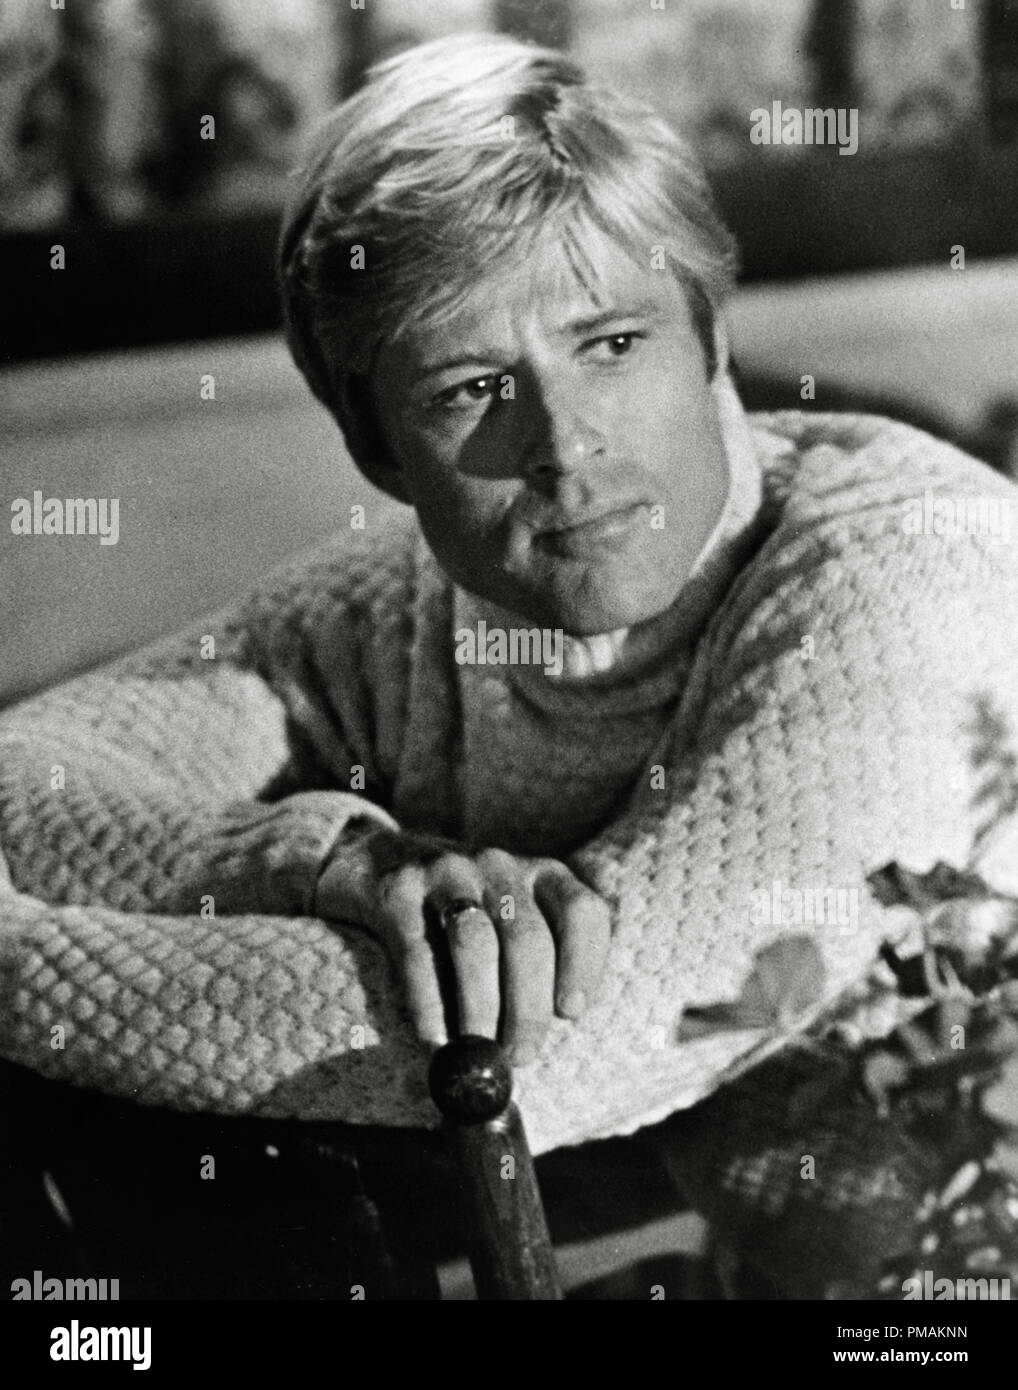 Robert Redford, 'The Way We Were' (1973) Columbia Pictures     File Reference # 33300 633THA Stock Photo